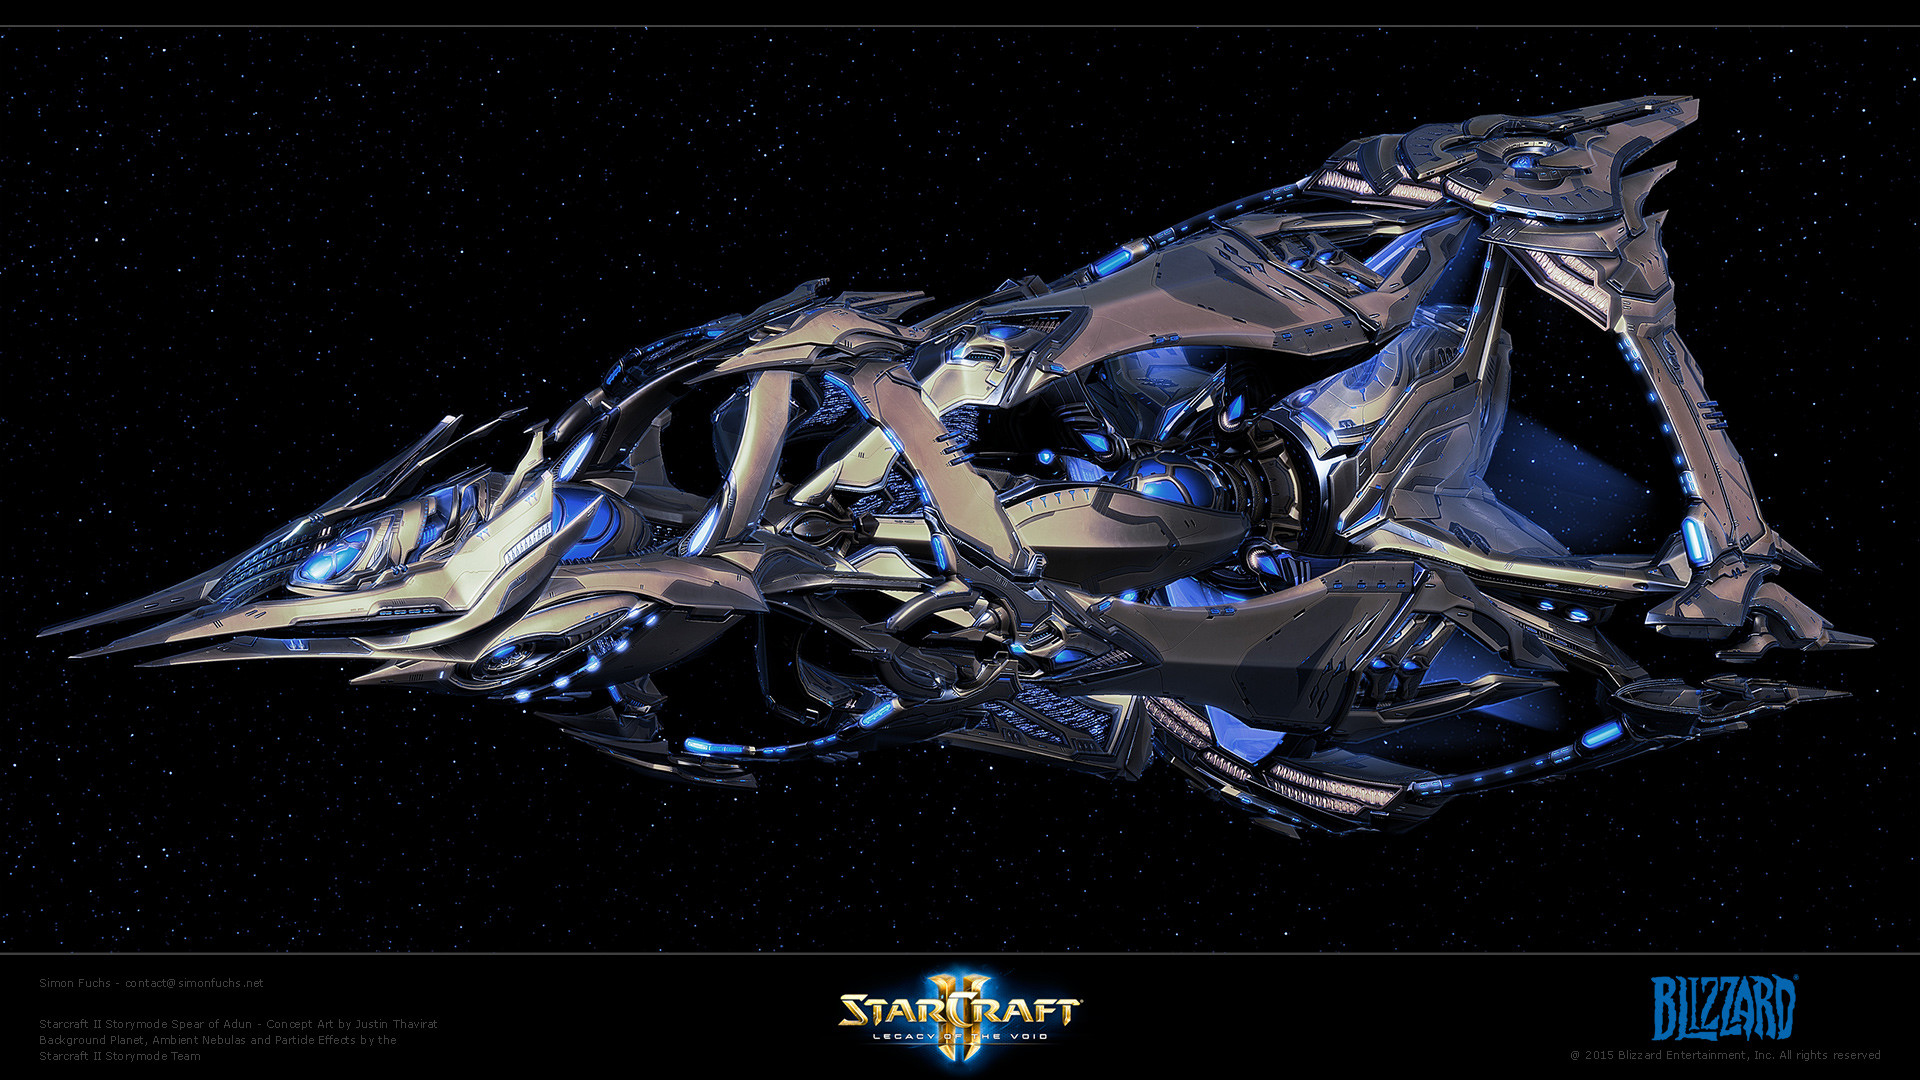 Starcraft II Legacy of the Void - Spear of Adun - InGame by Simon Fuchs.